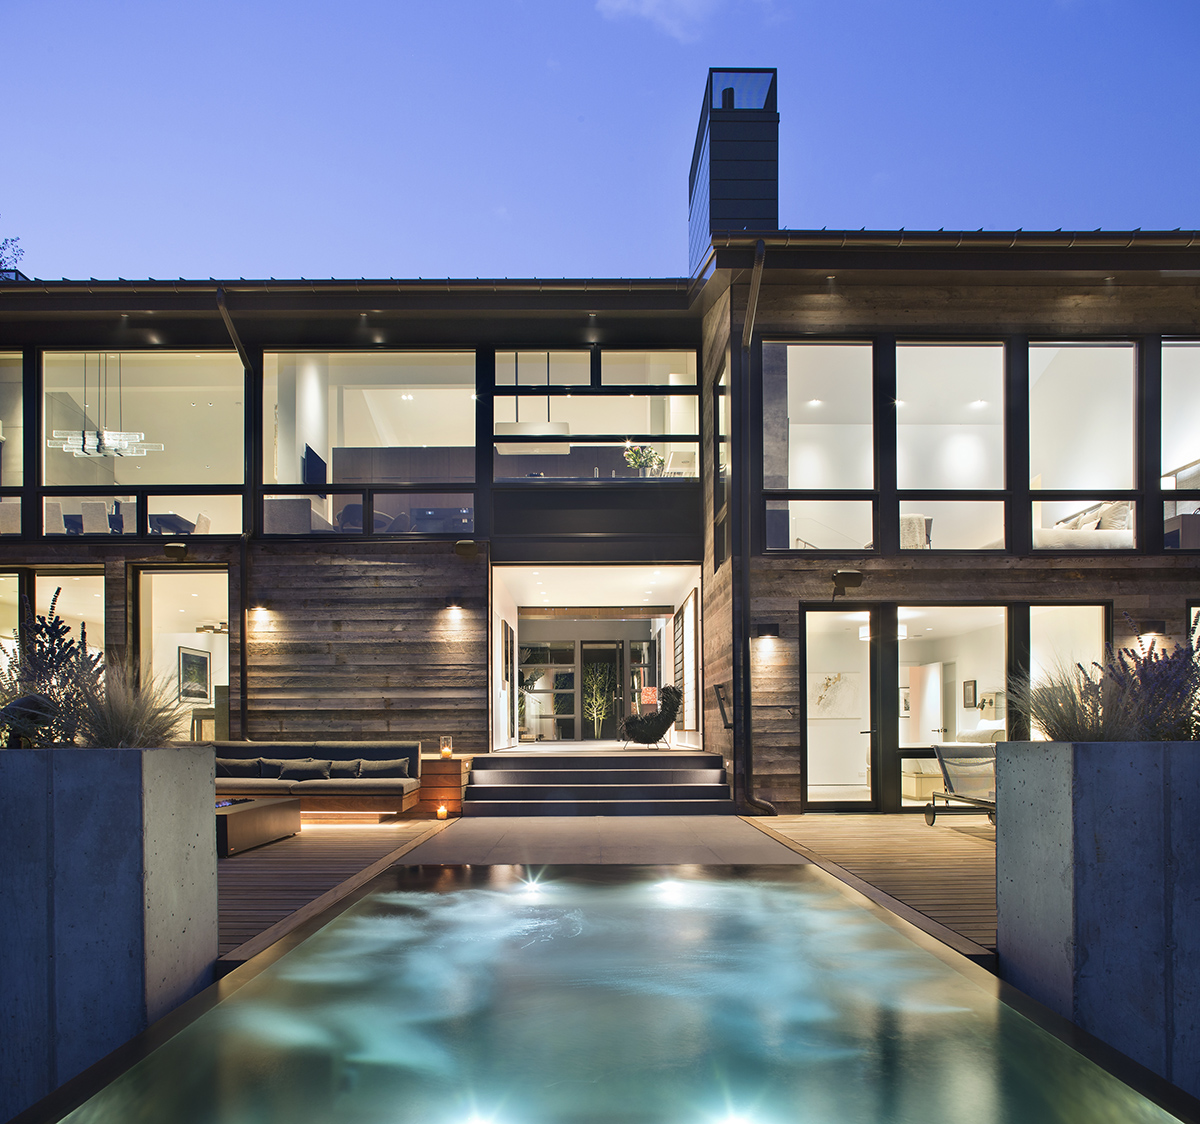 Exterior architectural design of lookout home with pool